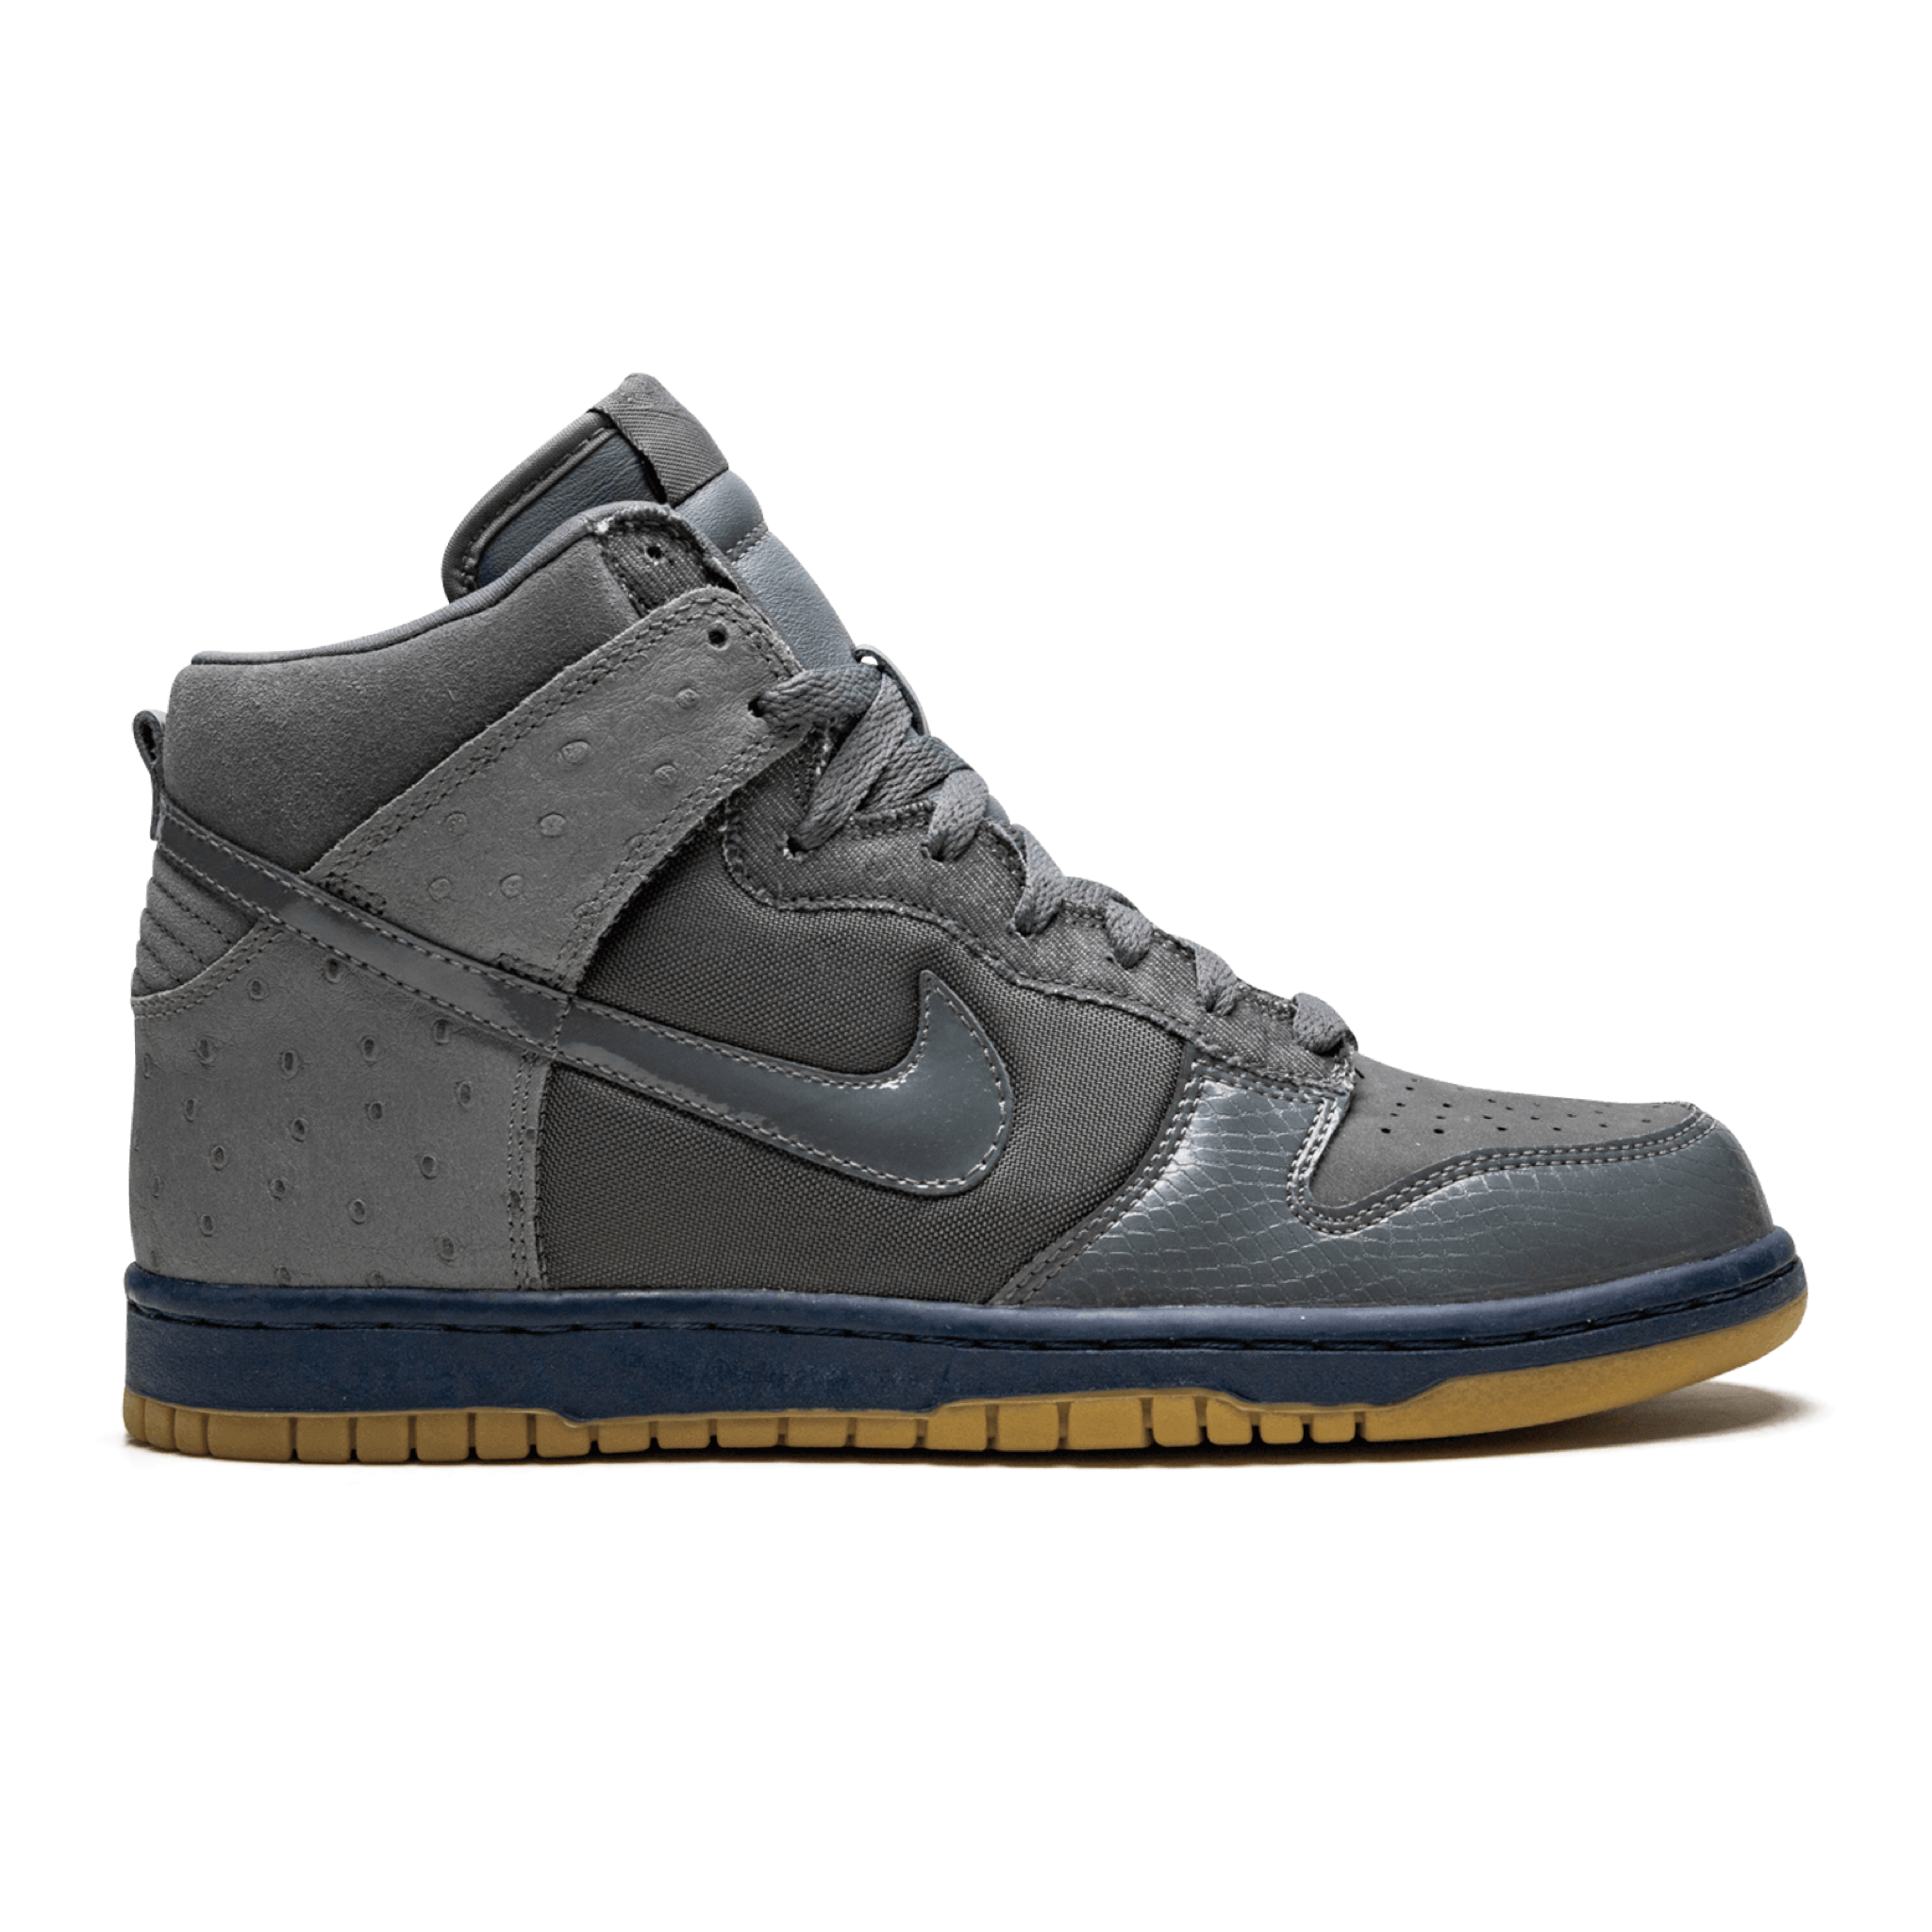 Nike Dunk High Deluxe Ostrich